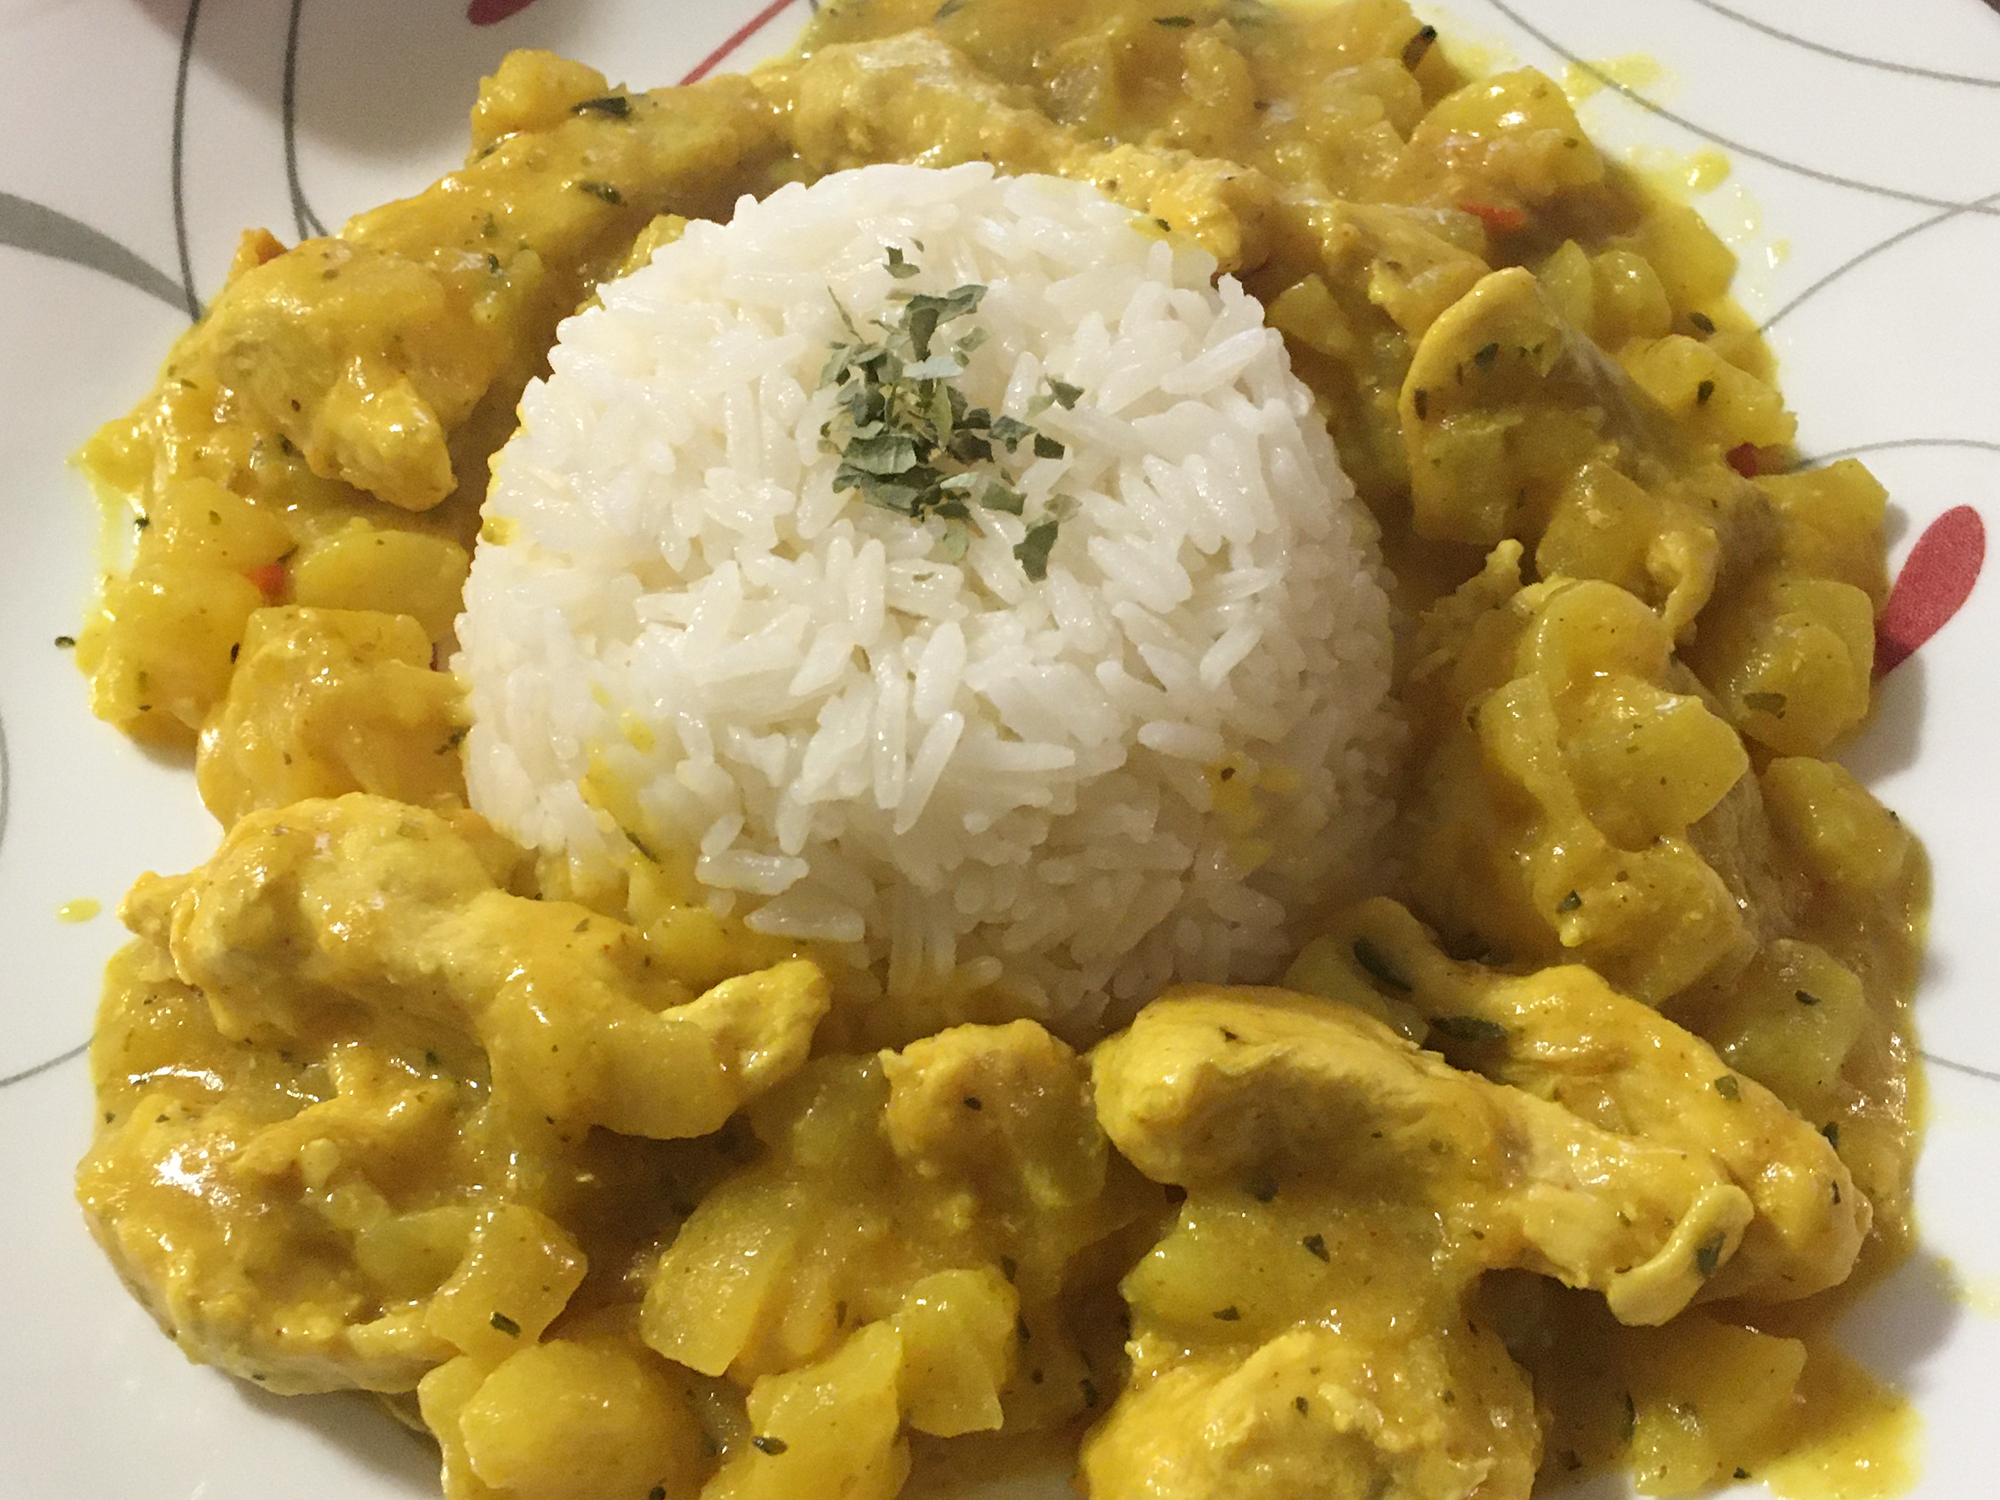 close up view of Curried Chicken surrounding white rice on a plate